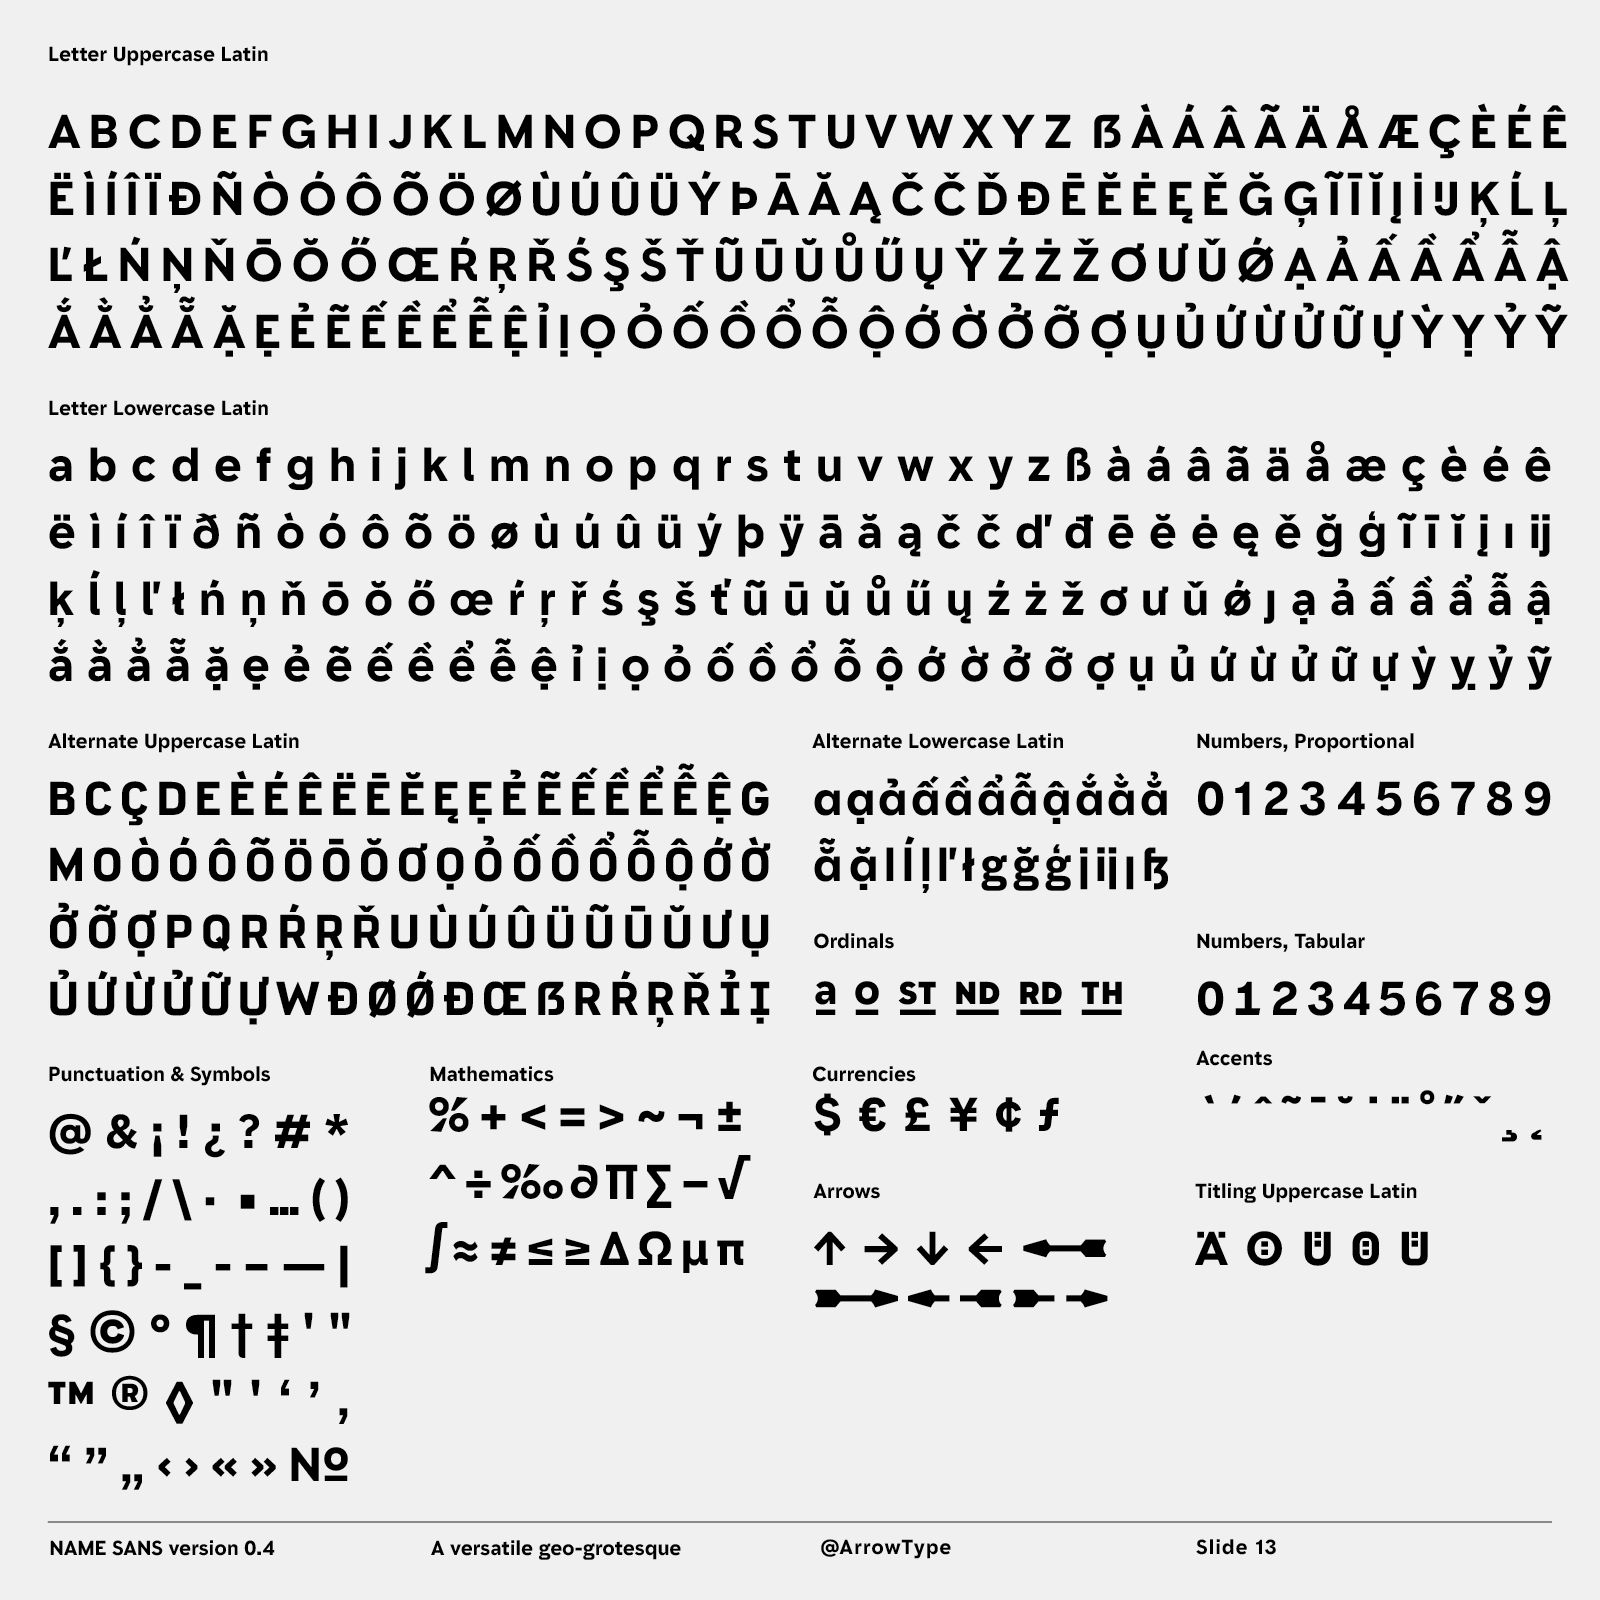 Arrow Type I M So Excited To Release Name Sans V0 4 The 4th Beta Of My Typeface Based On Nyc Subway Mosaics V0 4 Adds An Ultra Weight Unifies The Optical Sizes